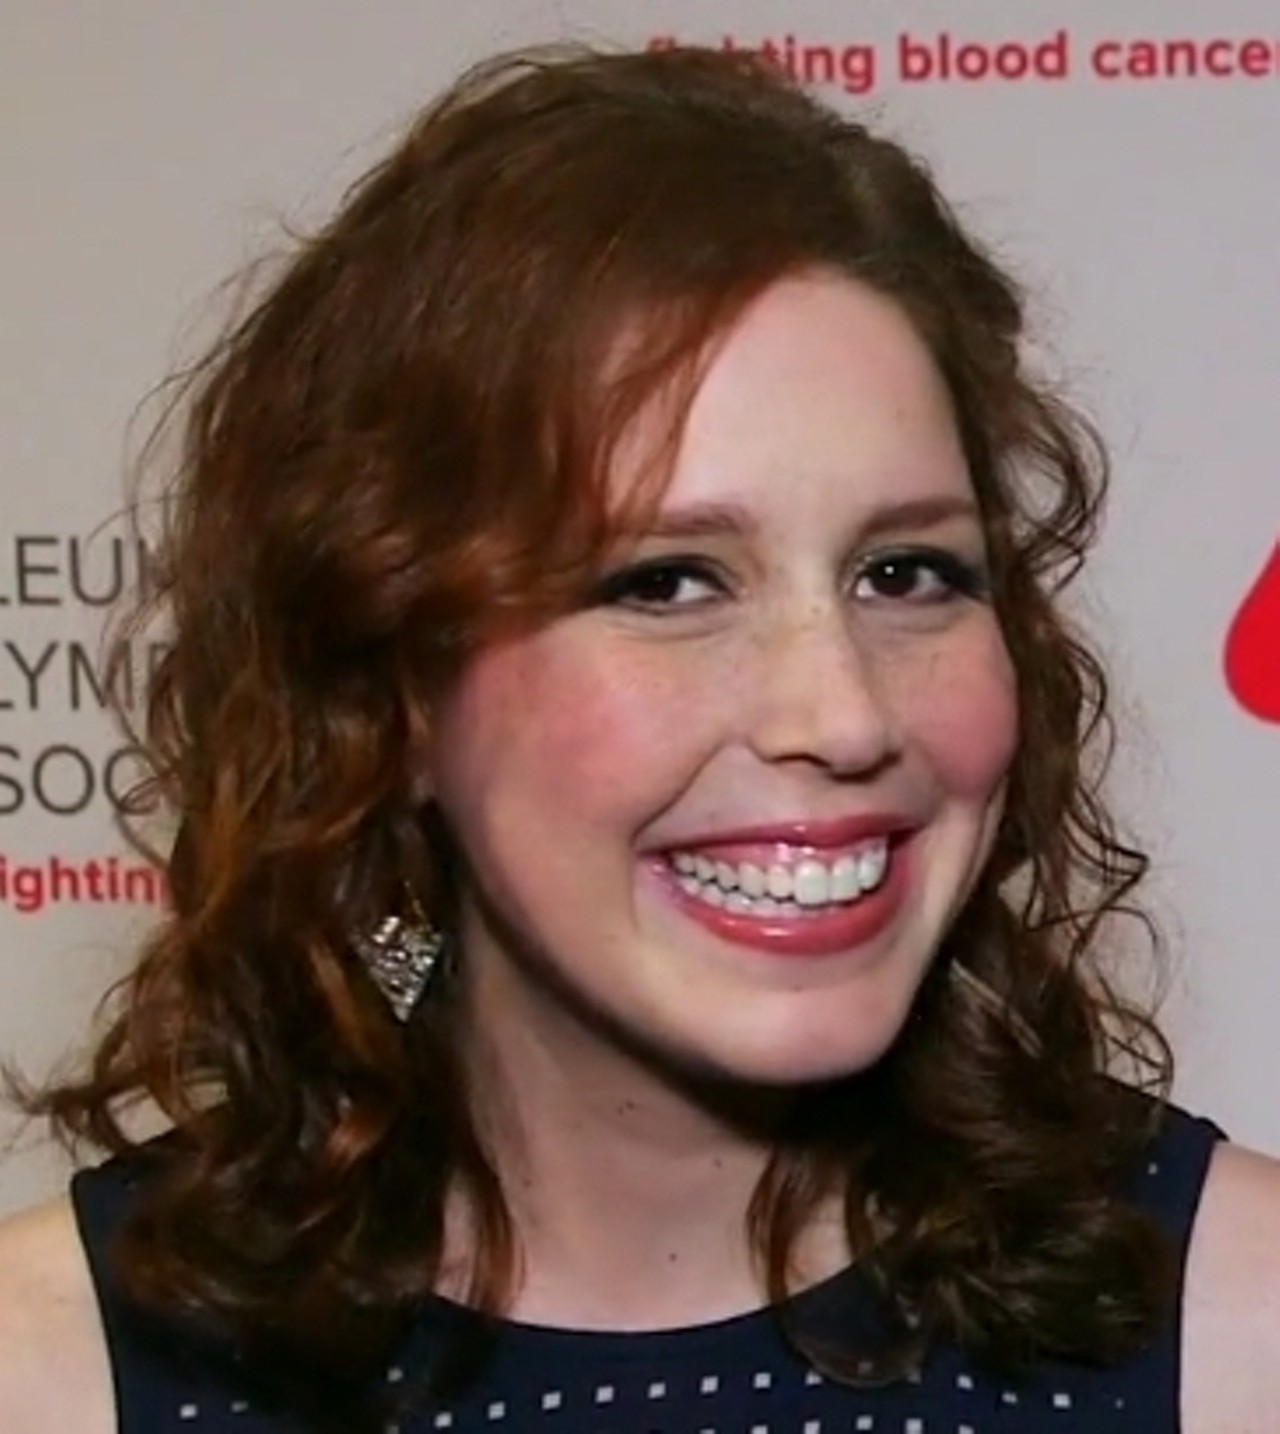  Vanessa Bayer
A comedic actress, Bayer starred on Saturday Night Live from 2010 to 2017 and has also starred in the films Trainwreck, Office Christmas Party, Ibiza and more. She was born and raised in the eastern suburb of Orange and attended Orange High School.
Photo via Wikimedia/Behind The Velvet Rope TV